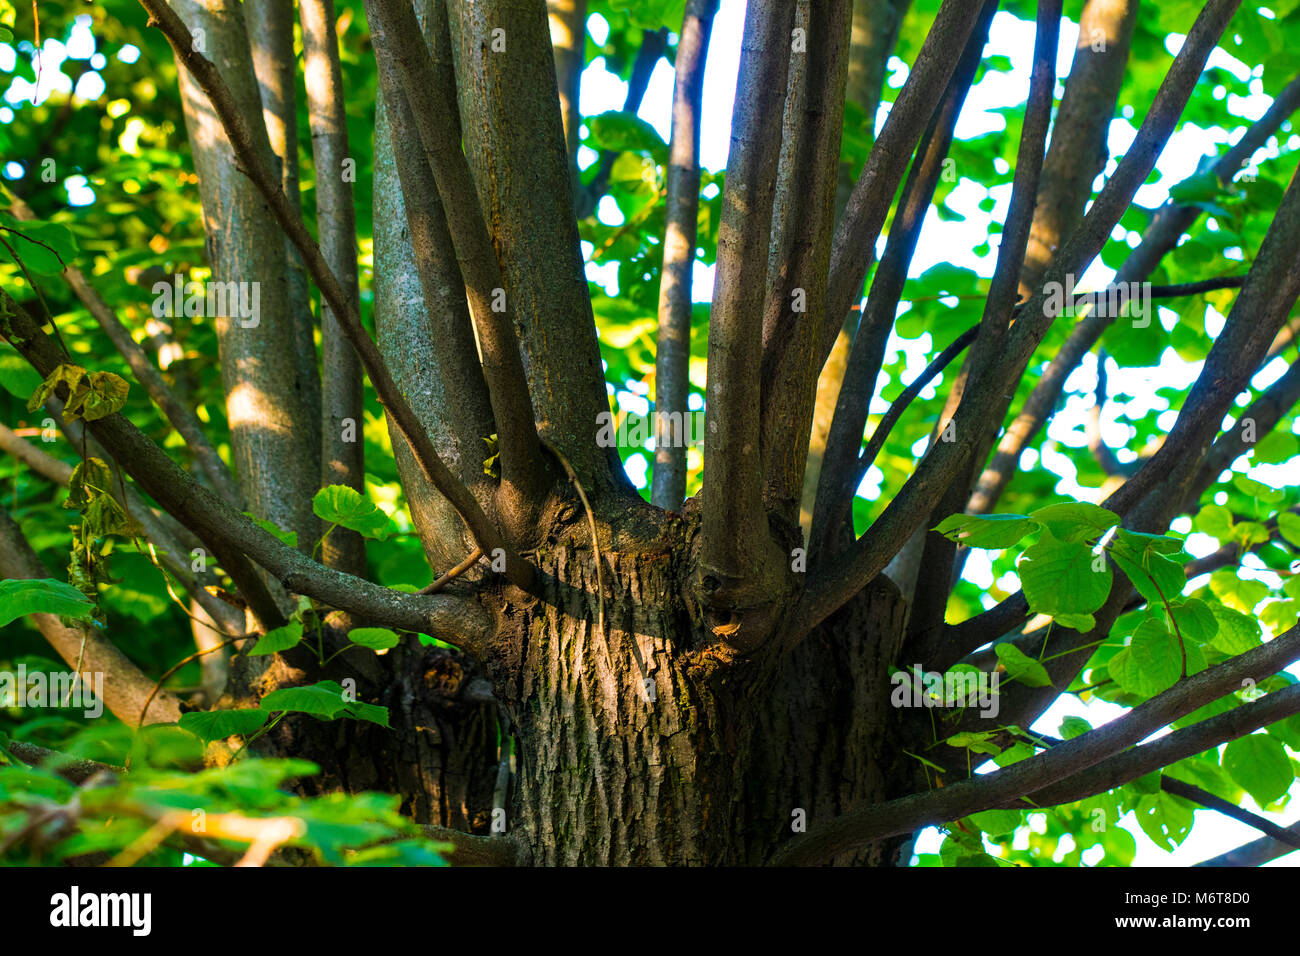 numerous green branches extending from the tree trunk. Stock Photo